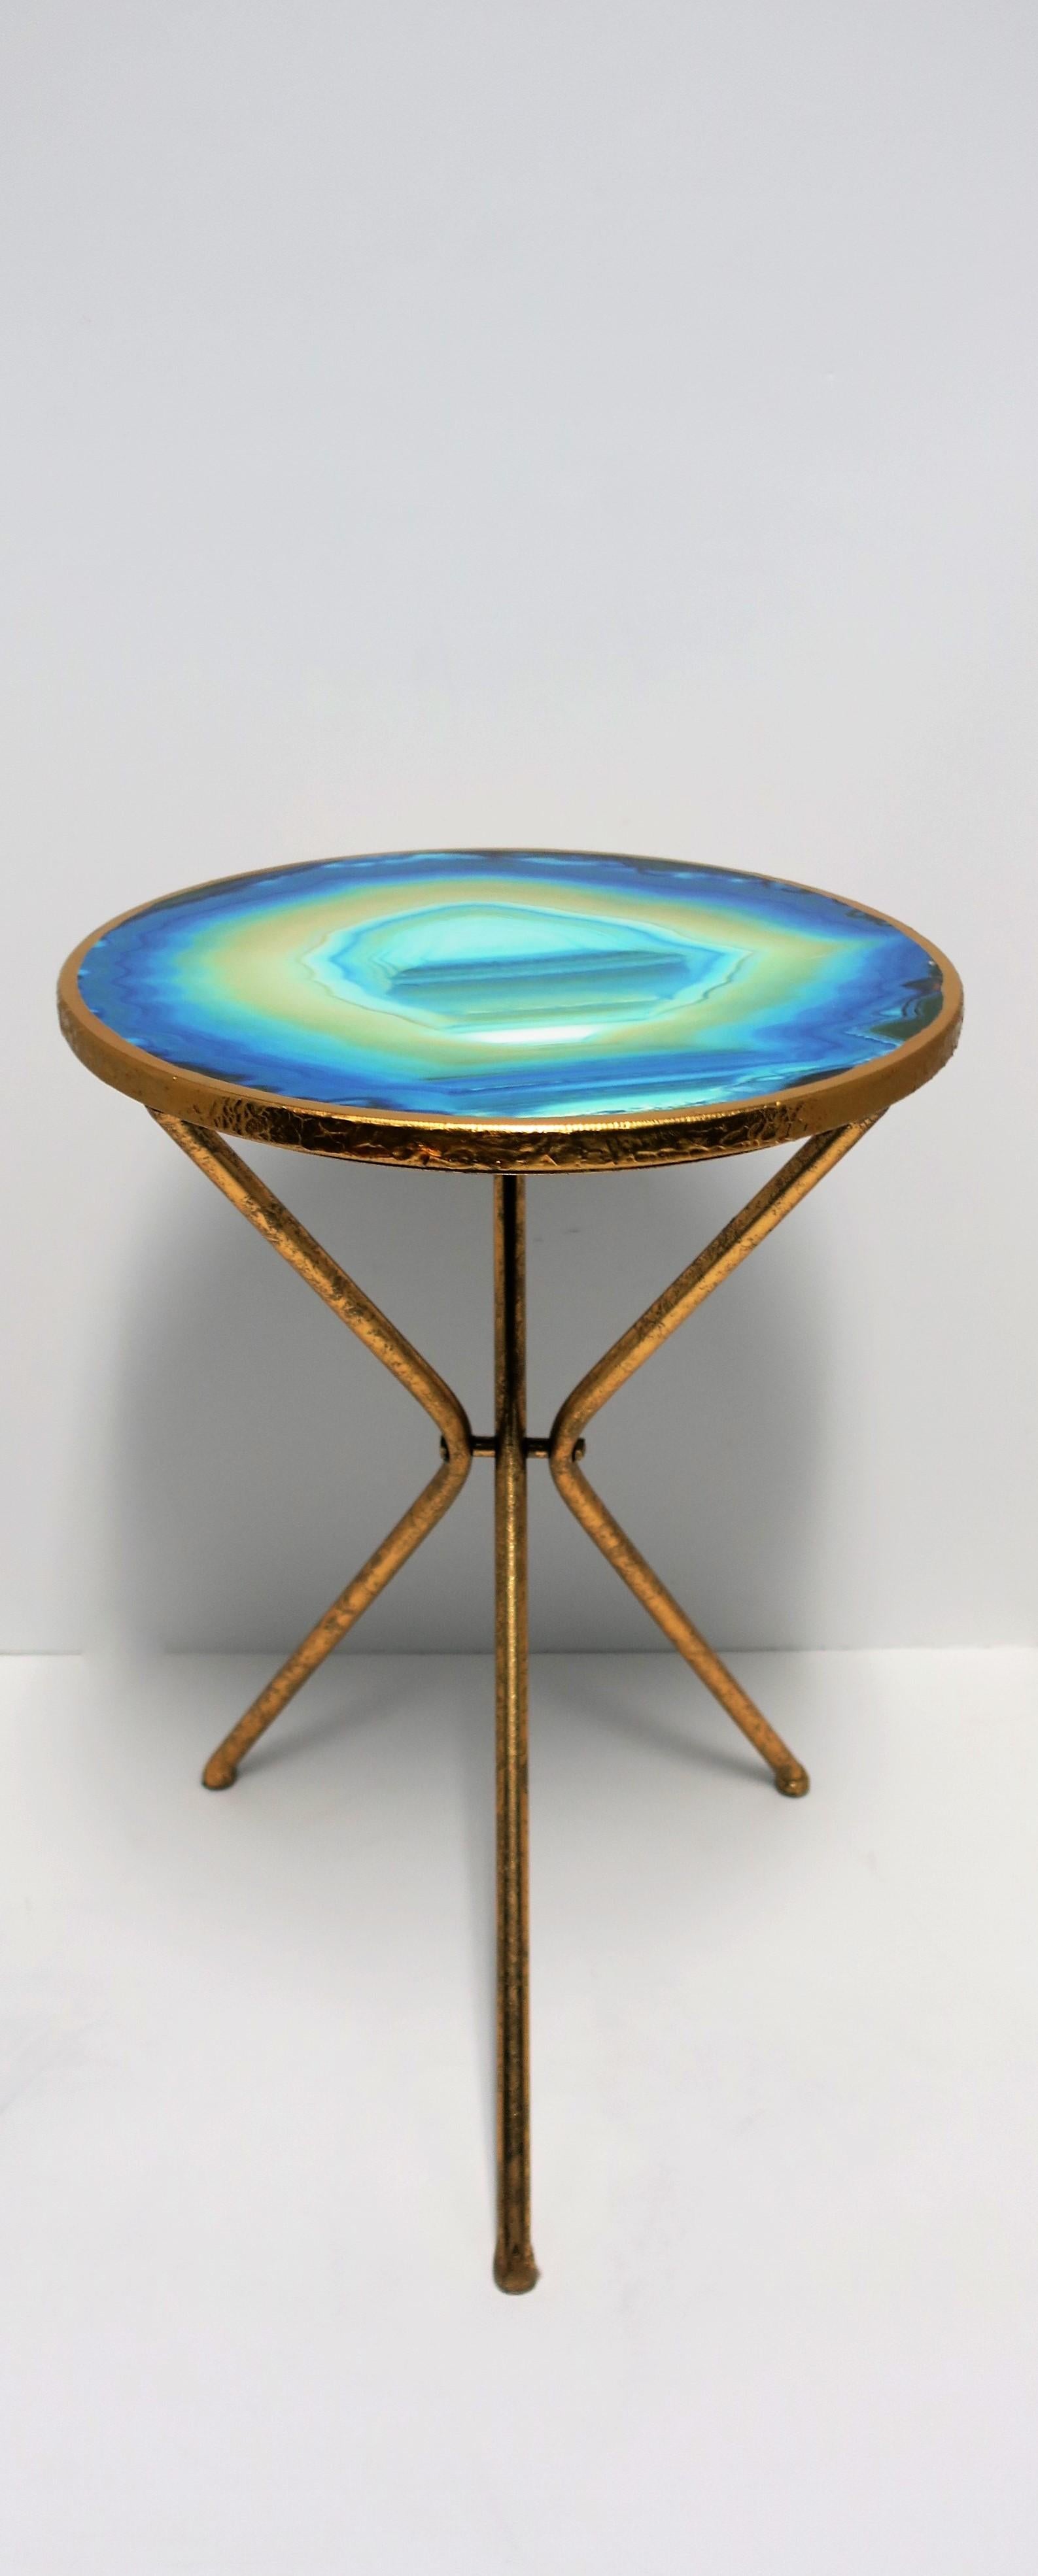 A beautiful and fun round gold gilt side or drinks table with agate style top. Table depicts a faux agate specimen piece top, gold gilt edge/sides, and tri-pod legs, circa 21st century. 

Table measures: 16